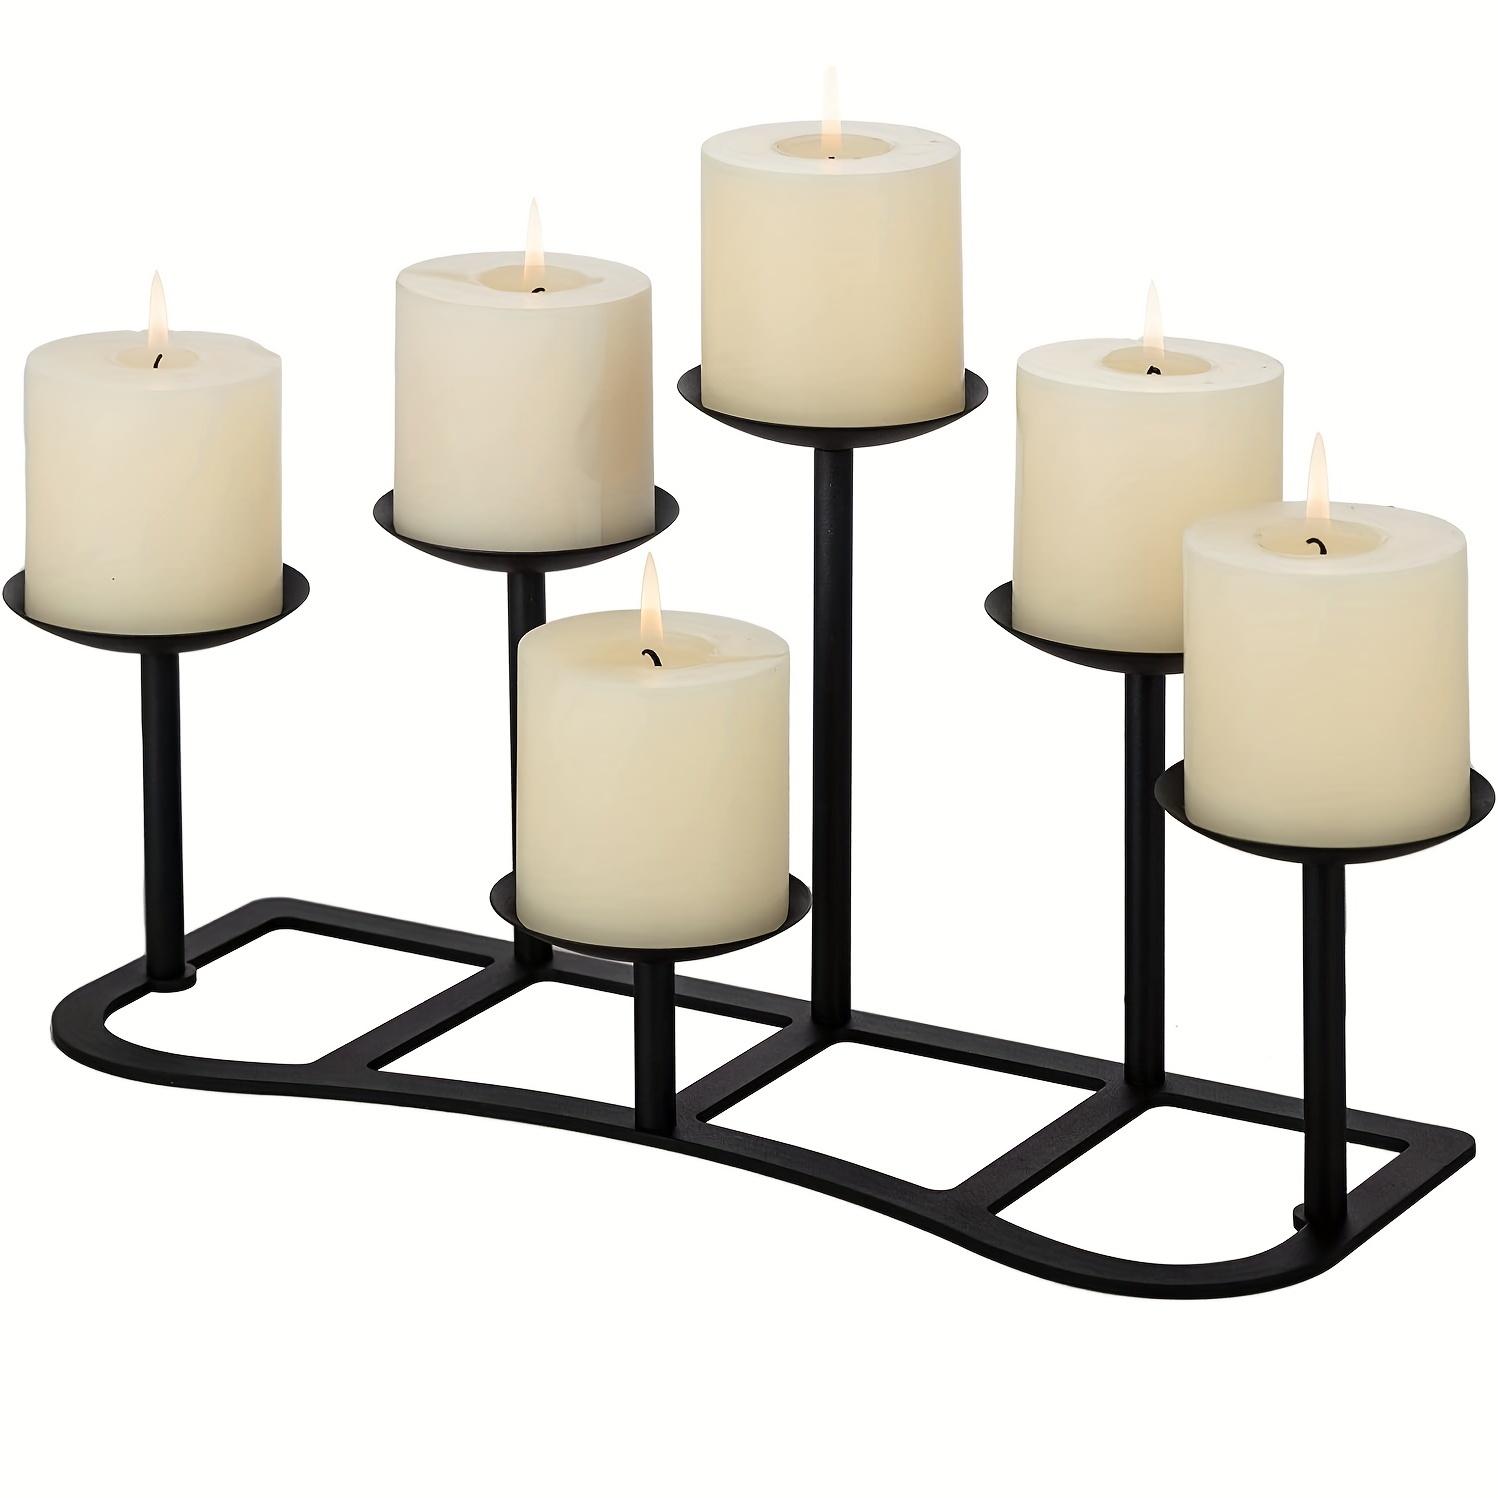  Mifoci Black Vintage Pillar Candle Holders for Christmas, Gothic  Candle Stand Table Centerpiece Matte Black Metal Candle Holders Decor for  Home Fireplace Party Decor(11.02'', 4 Pcs) : Home & Kitchen